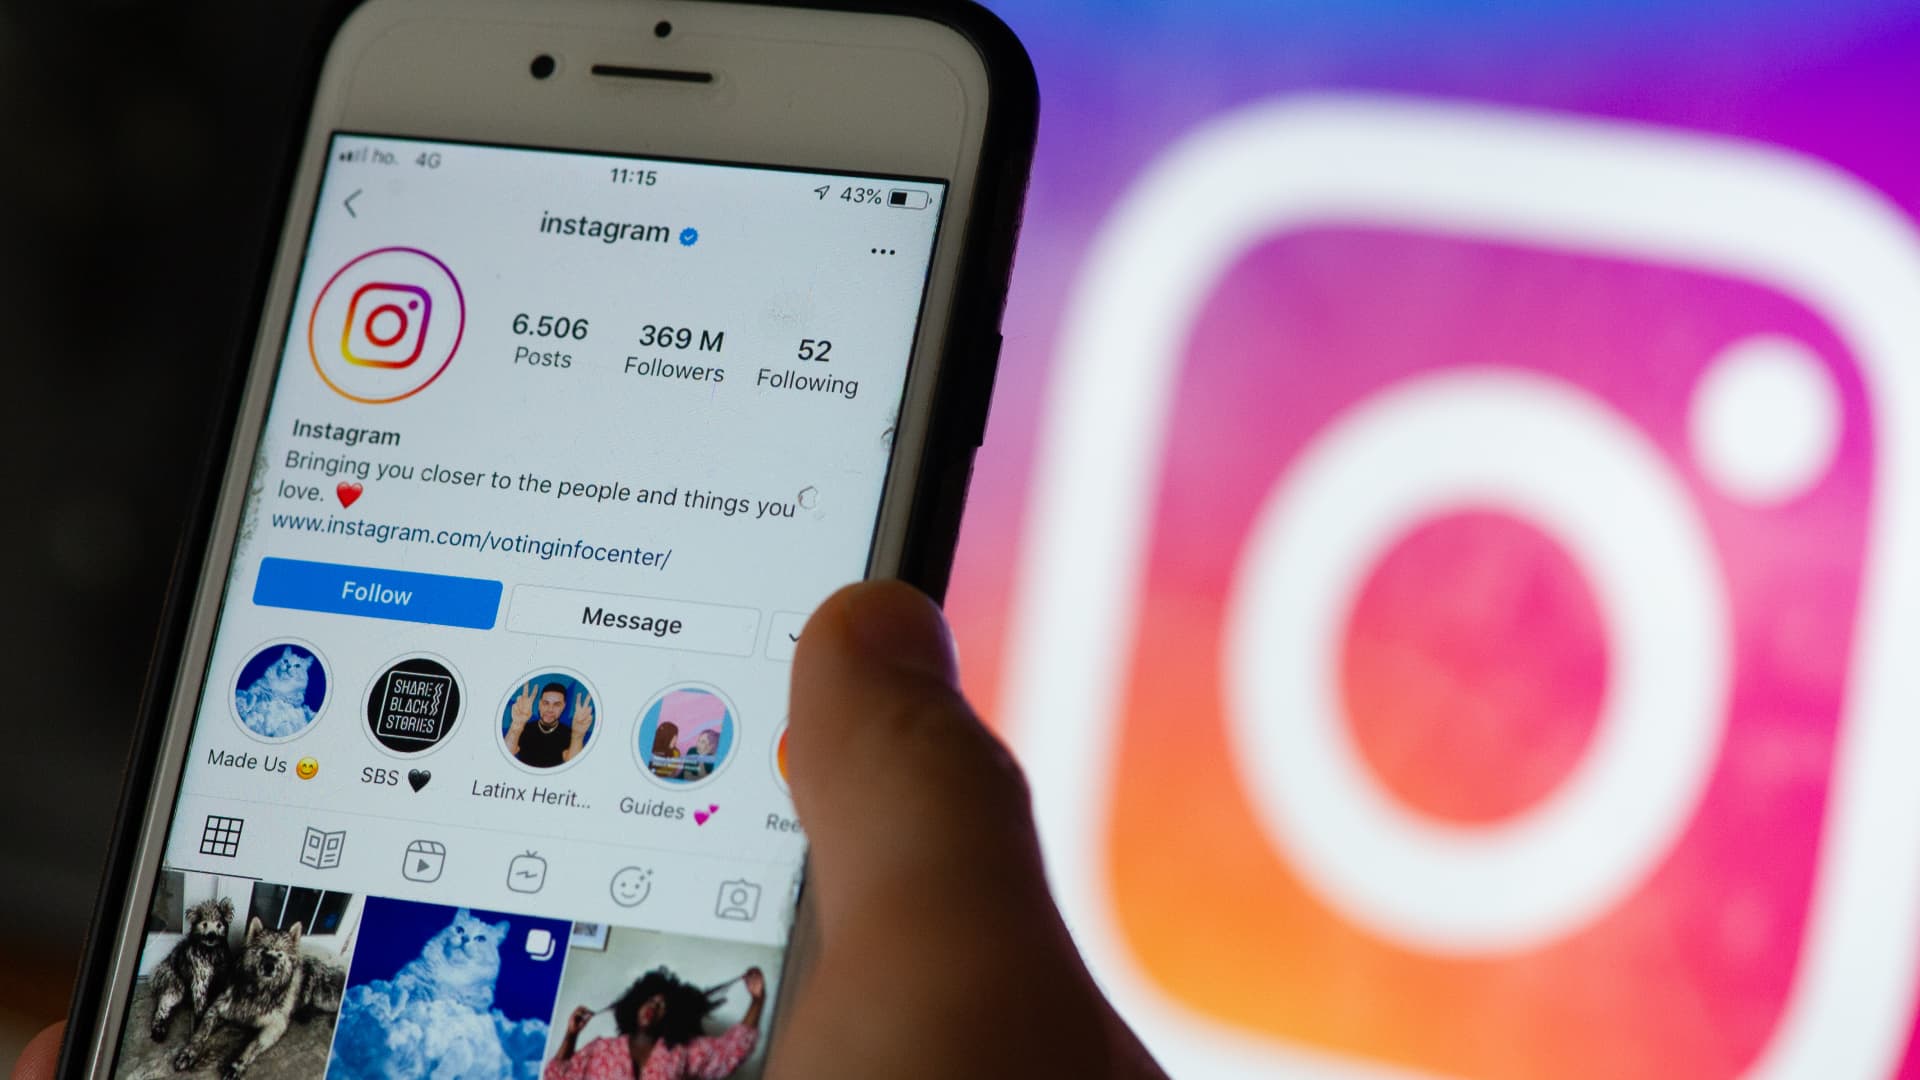 Instagram is testing new ways for teens to verify they're 18 years old, including video selfies